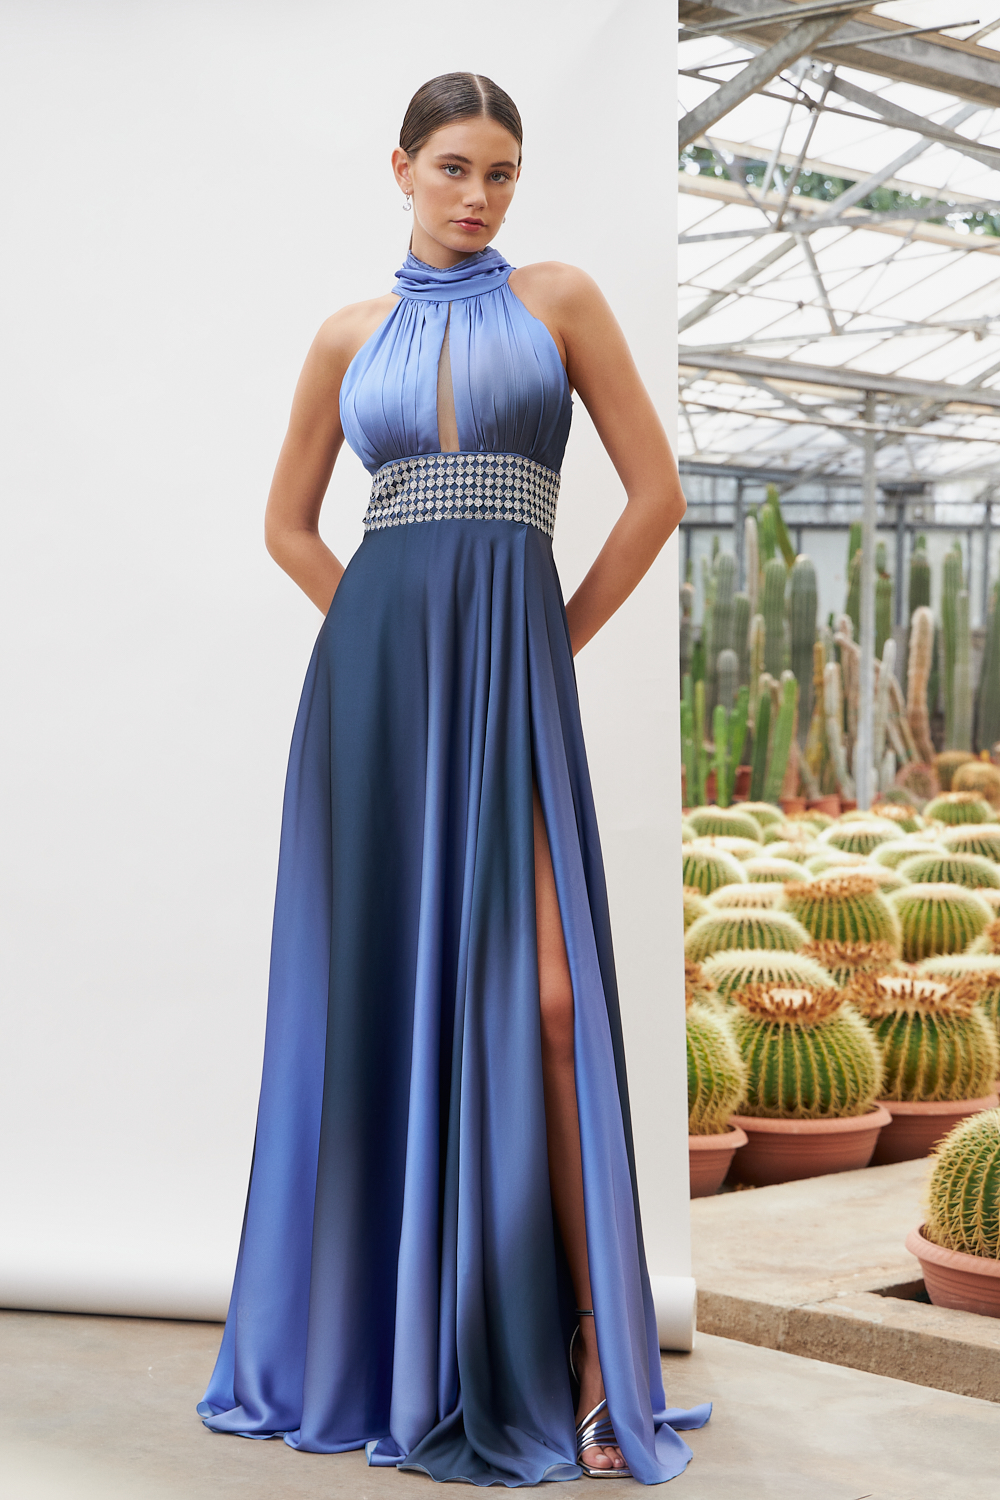 Коктейльные платья / Long cocktail satin dress with beading at the waist and open back